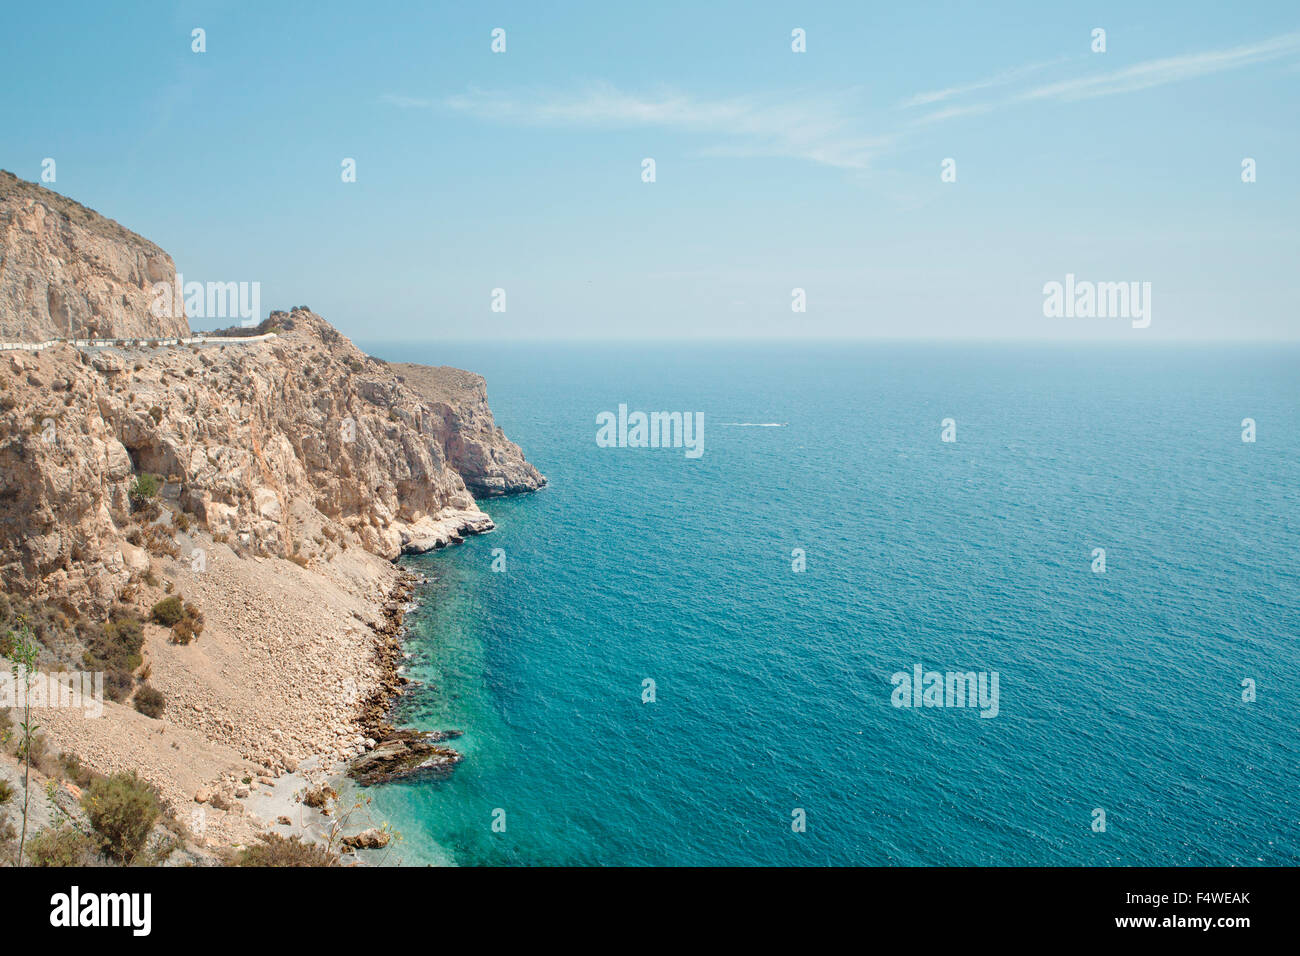 Spain, Andalusia, Elevated view of coastline at sunny day Stock Photo